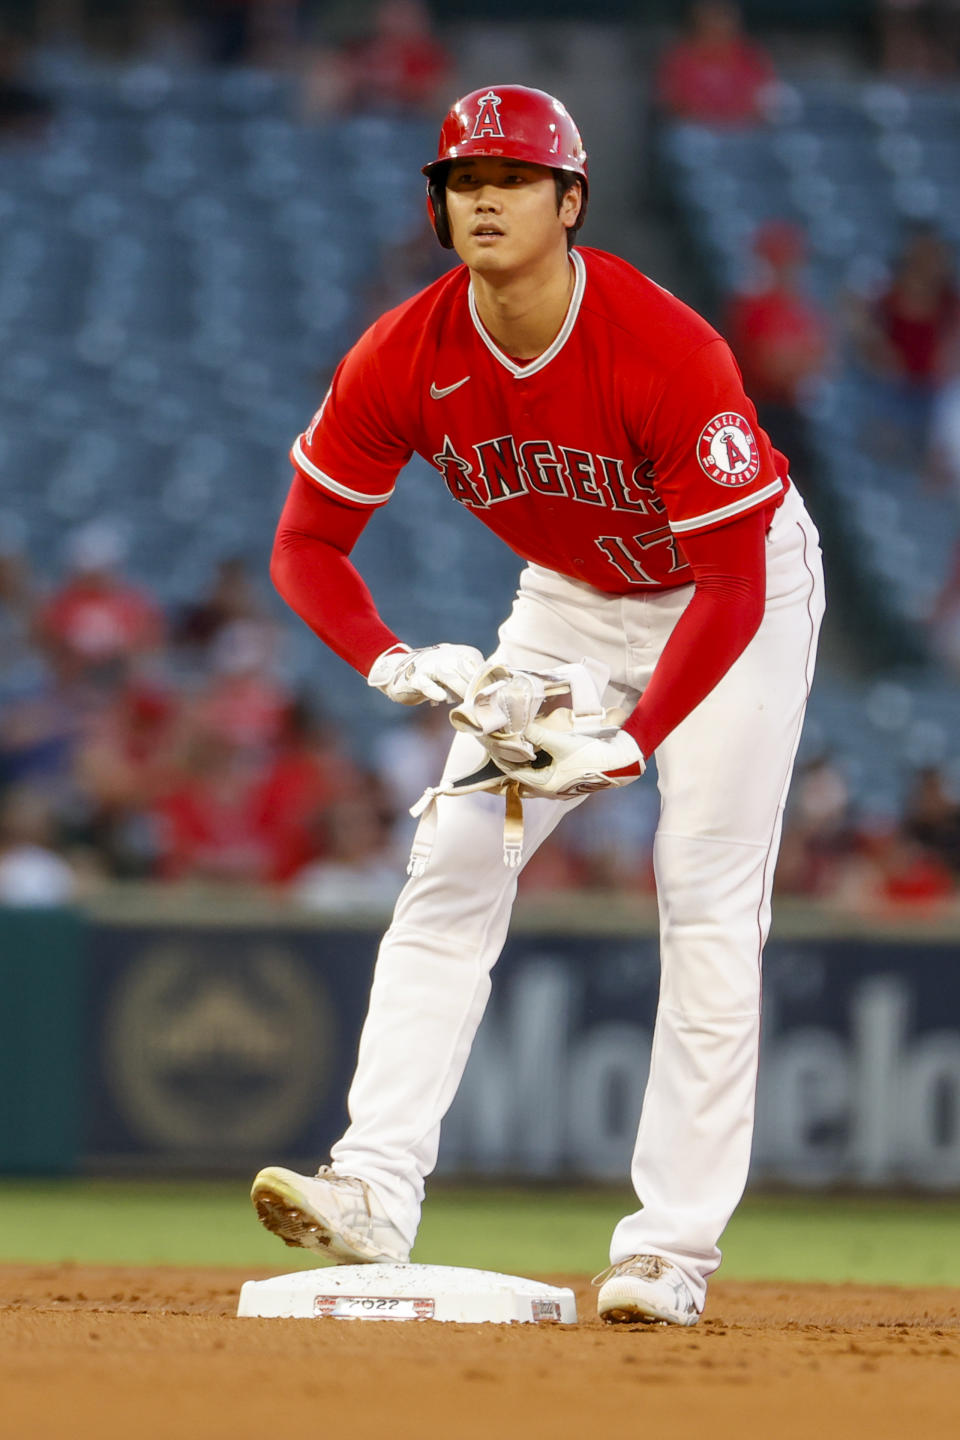 Los Angeles Angels' Shohei Ohtani stands at third base during the first inning of a baseball game against the Detroit Tigers in Anaheim, Calif., Monday, Sept. 5, 2022. (AP Photo/Ringo H.W. Chiu)